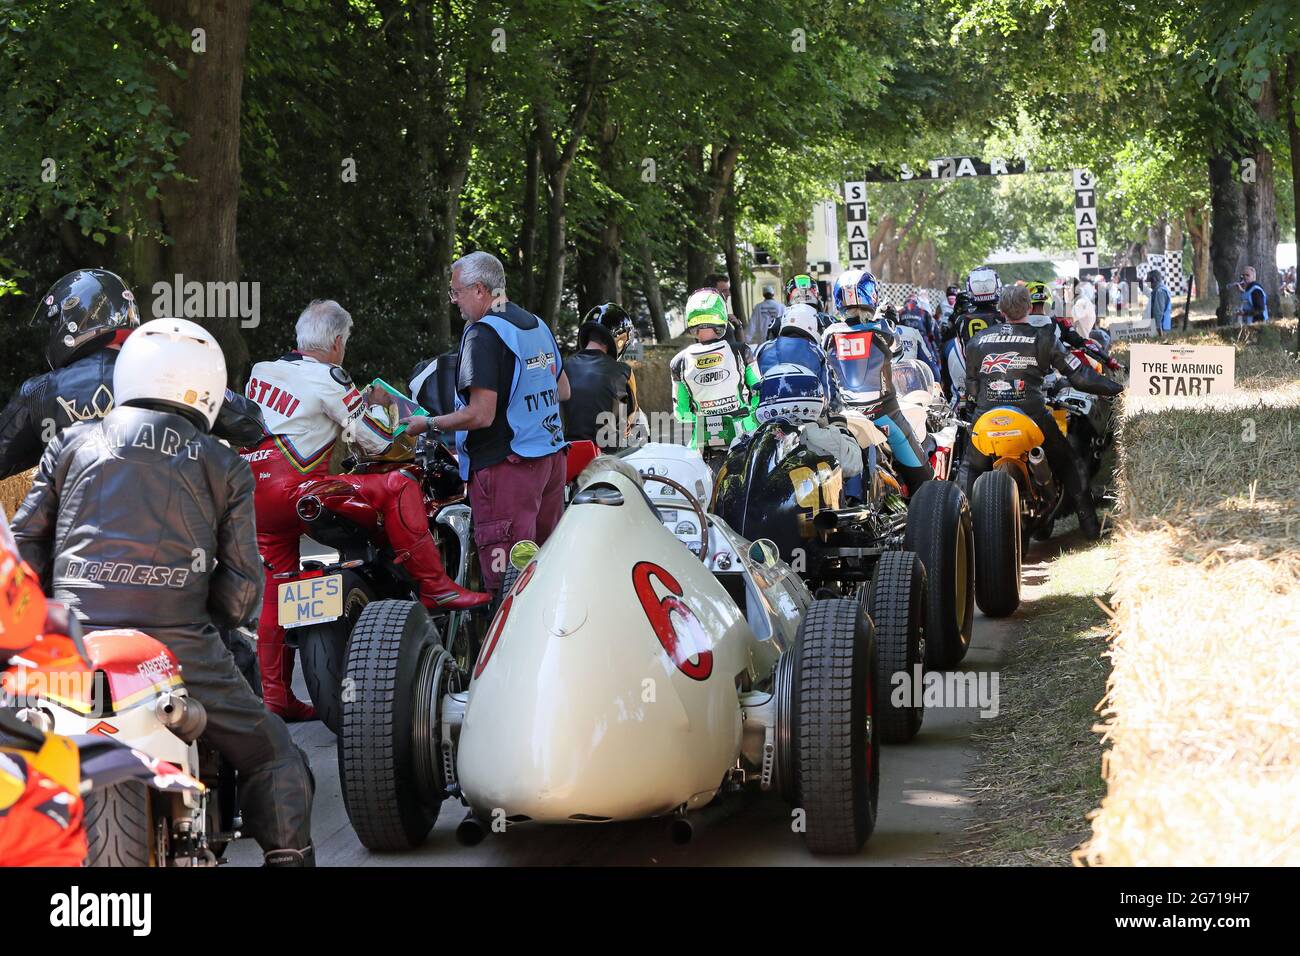 Goodwood, West Sussex, UK. 9th July 2021. Giacomo Agostini multiple motorcycle Grand Prix World Champion signs an autograph while awaiting his ride up the hillclimb at the Goodwood Festival of Speed – ‘The Maestros – Motorsports Great All-Rounders’, in Goodwood, West Sussex, UK. © Malcolm Greig/Alamy Live News Stock Photo